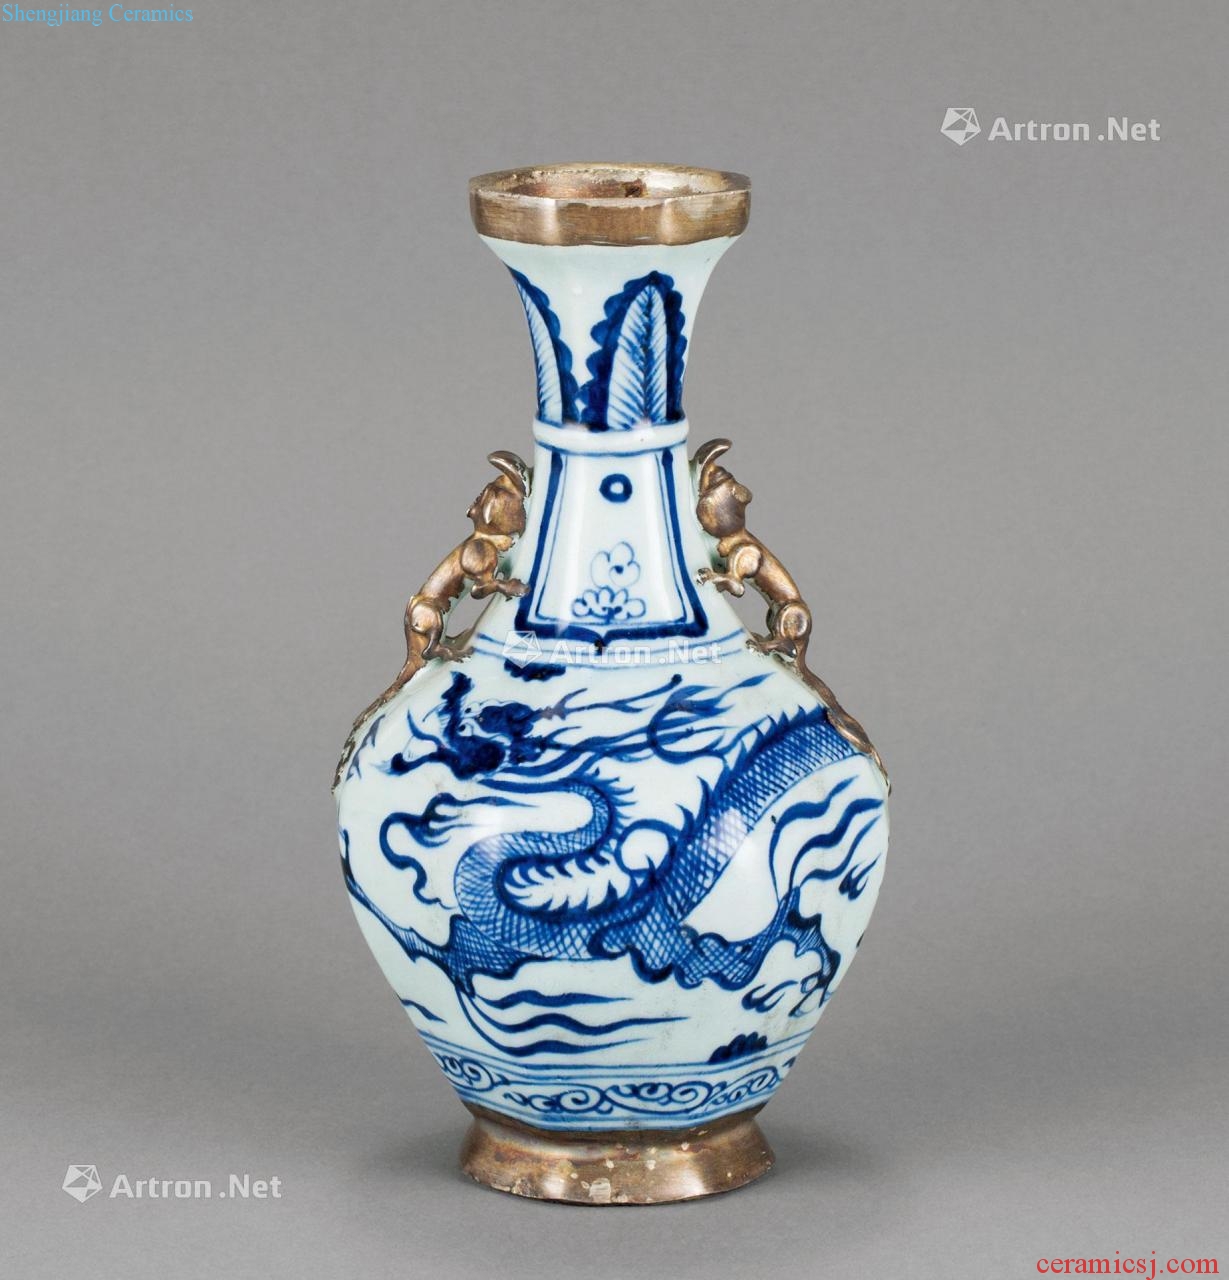 The yuan dynasty Blue and white dragon double beast ear anise bottle